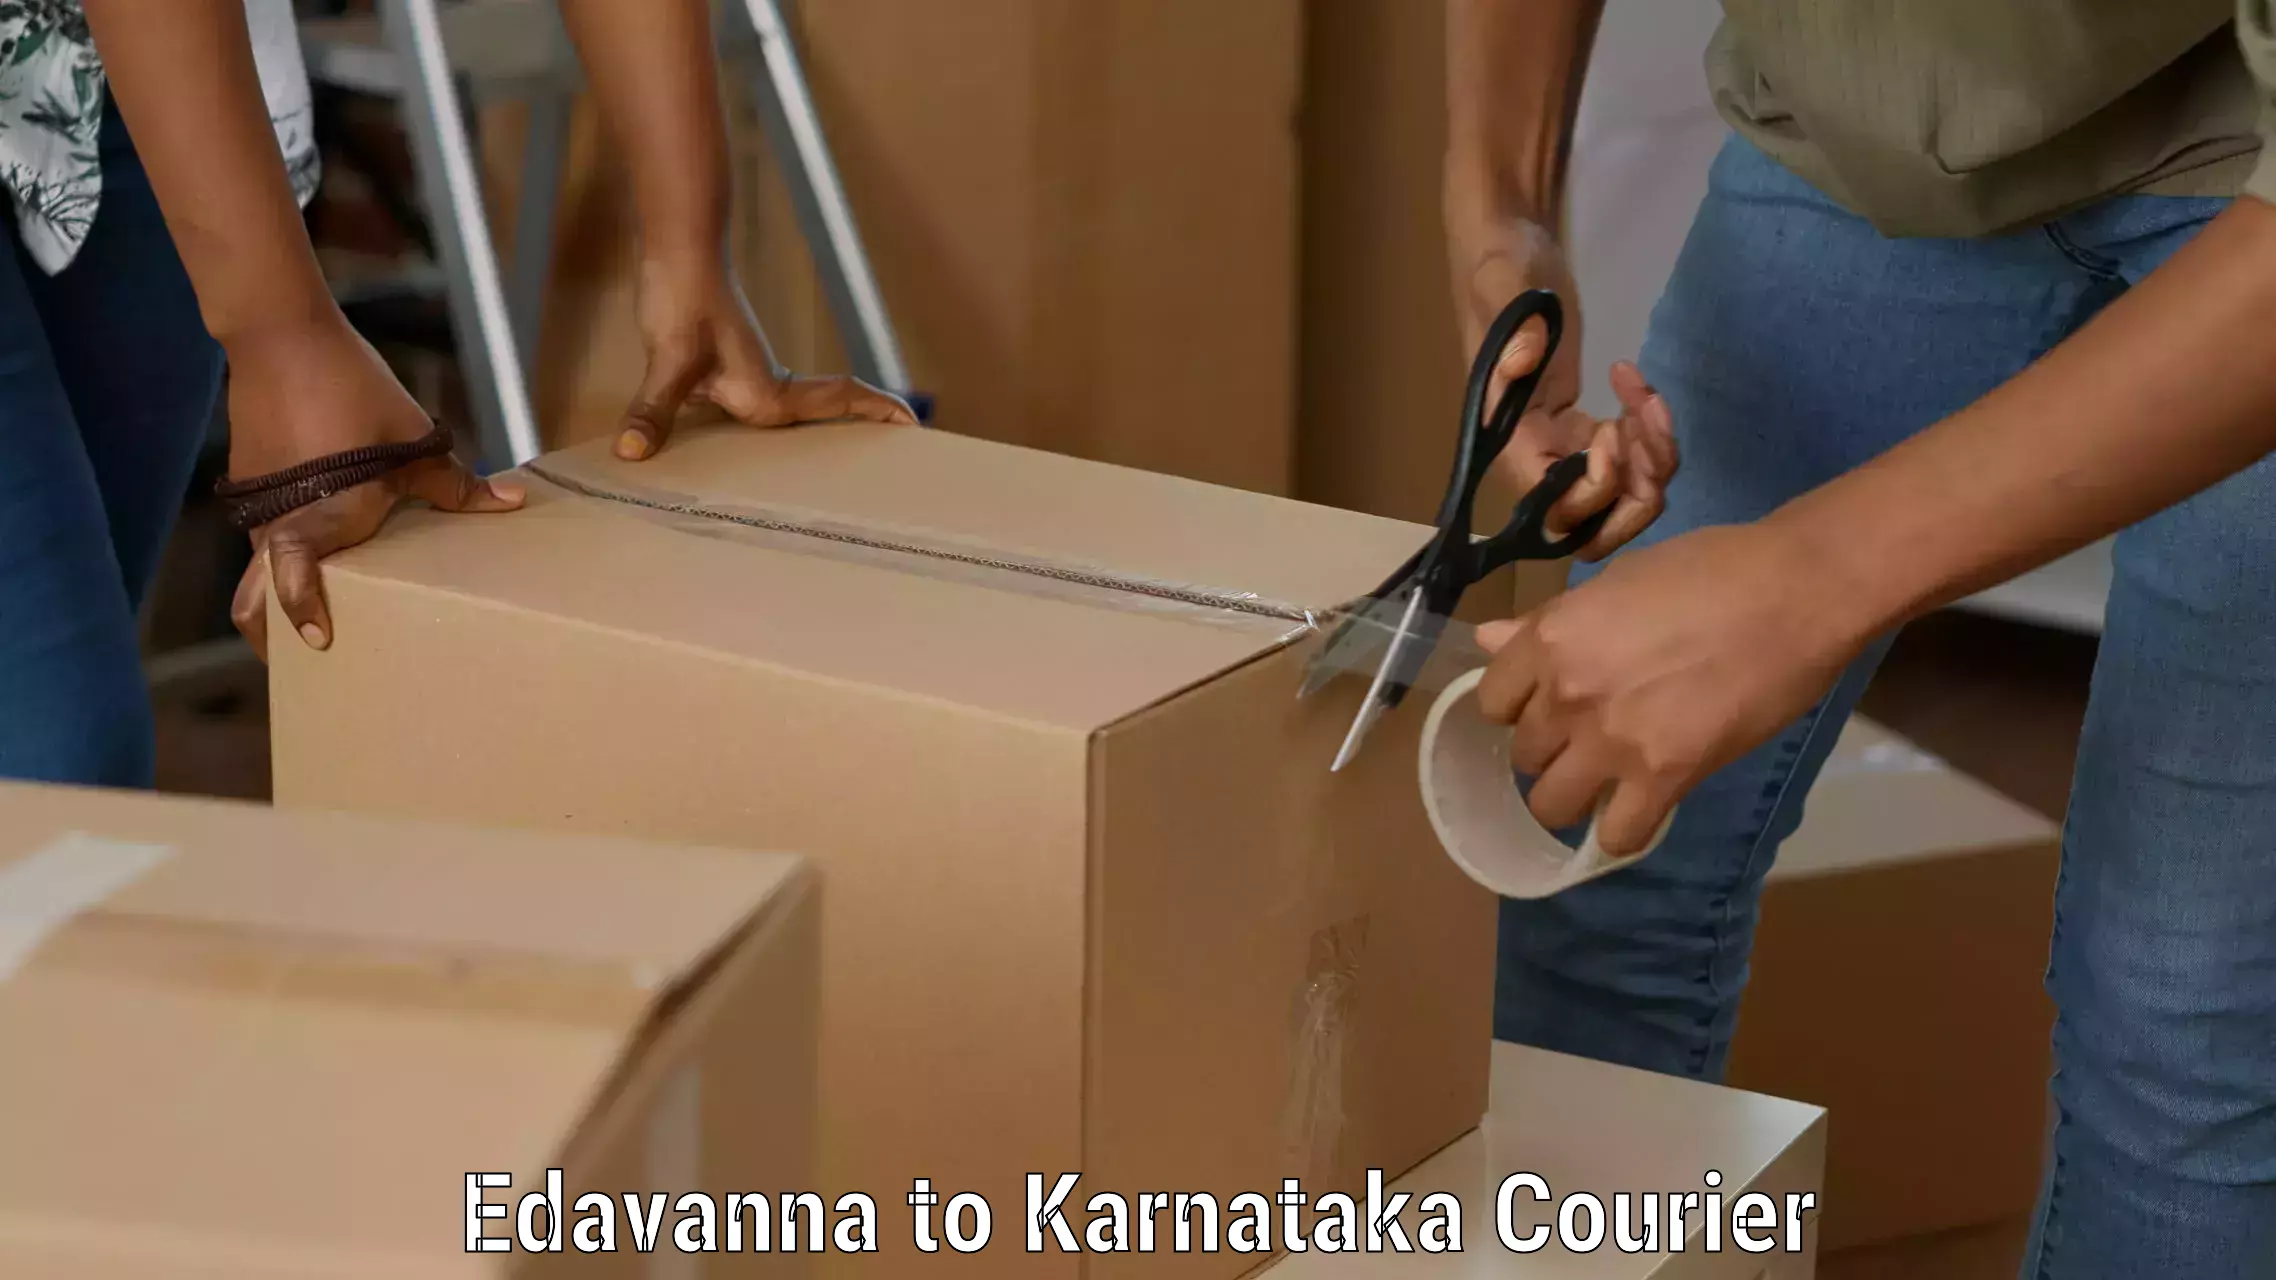 Package delivery network Edavanna to Yadgiri